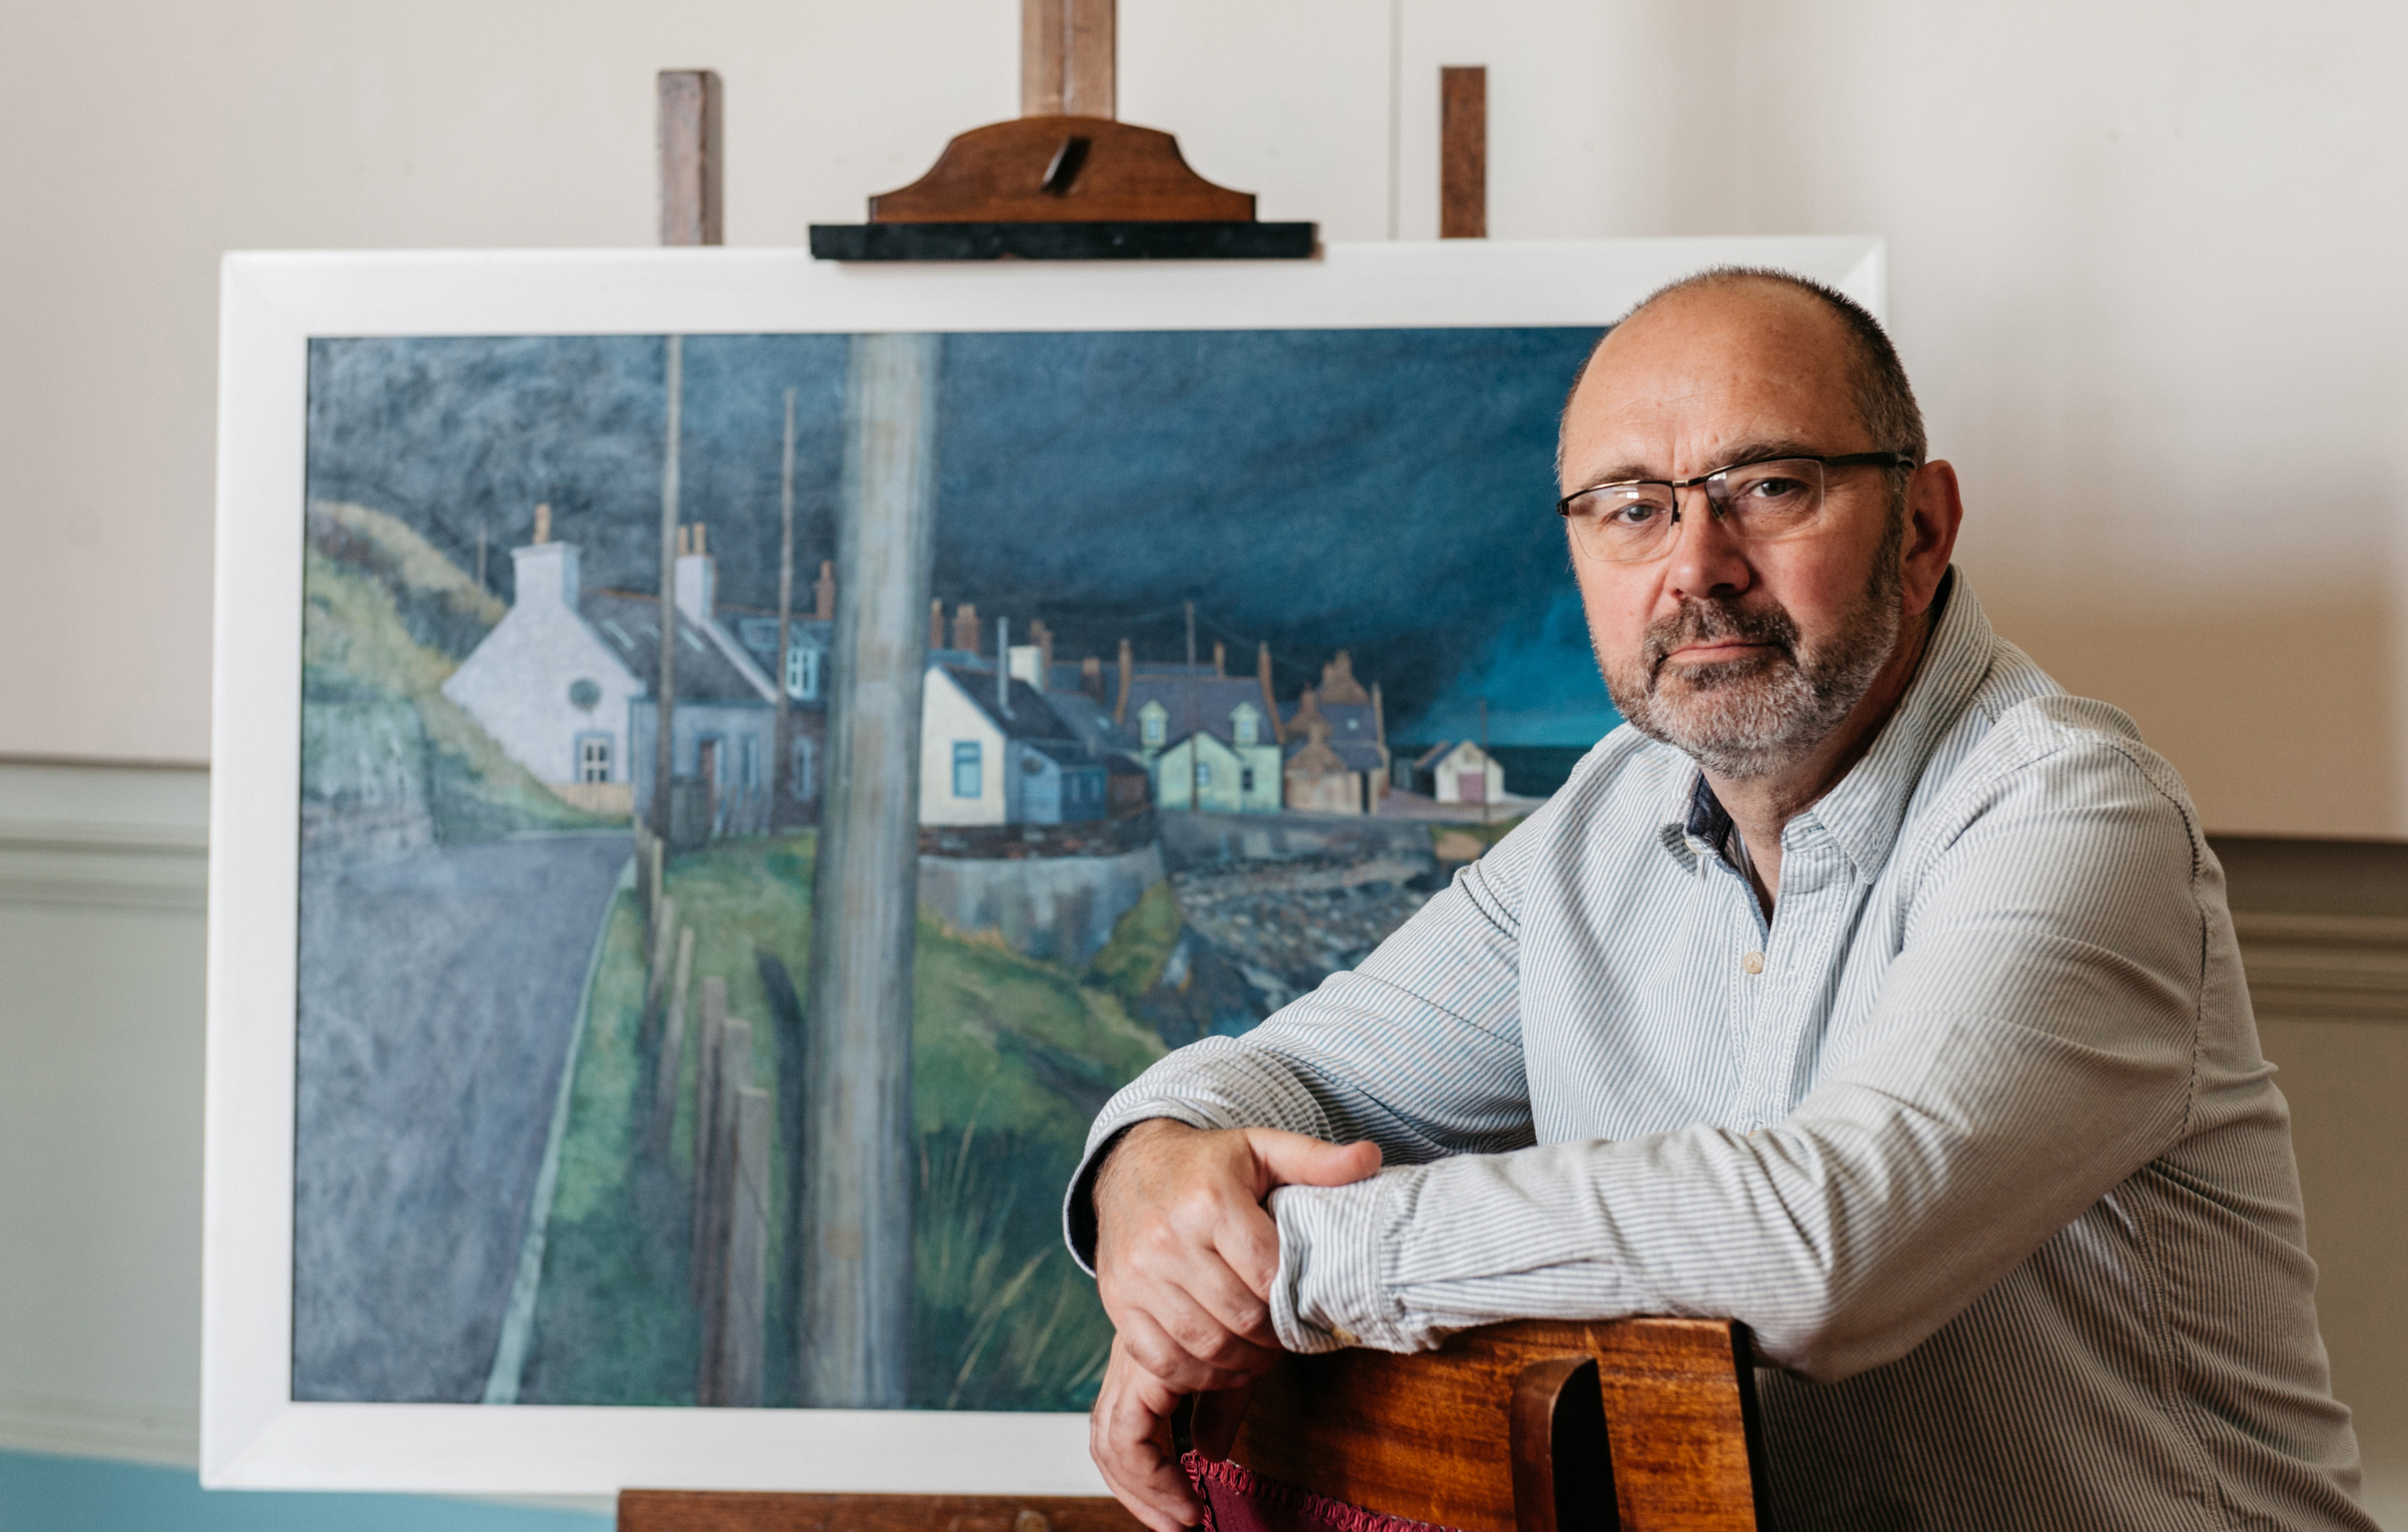 Artist Bryan Angus at Duff house ahead of his exhibtion.  8th July 2015.  Image by Donna Murray Photography